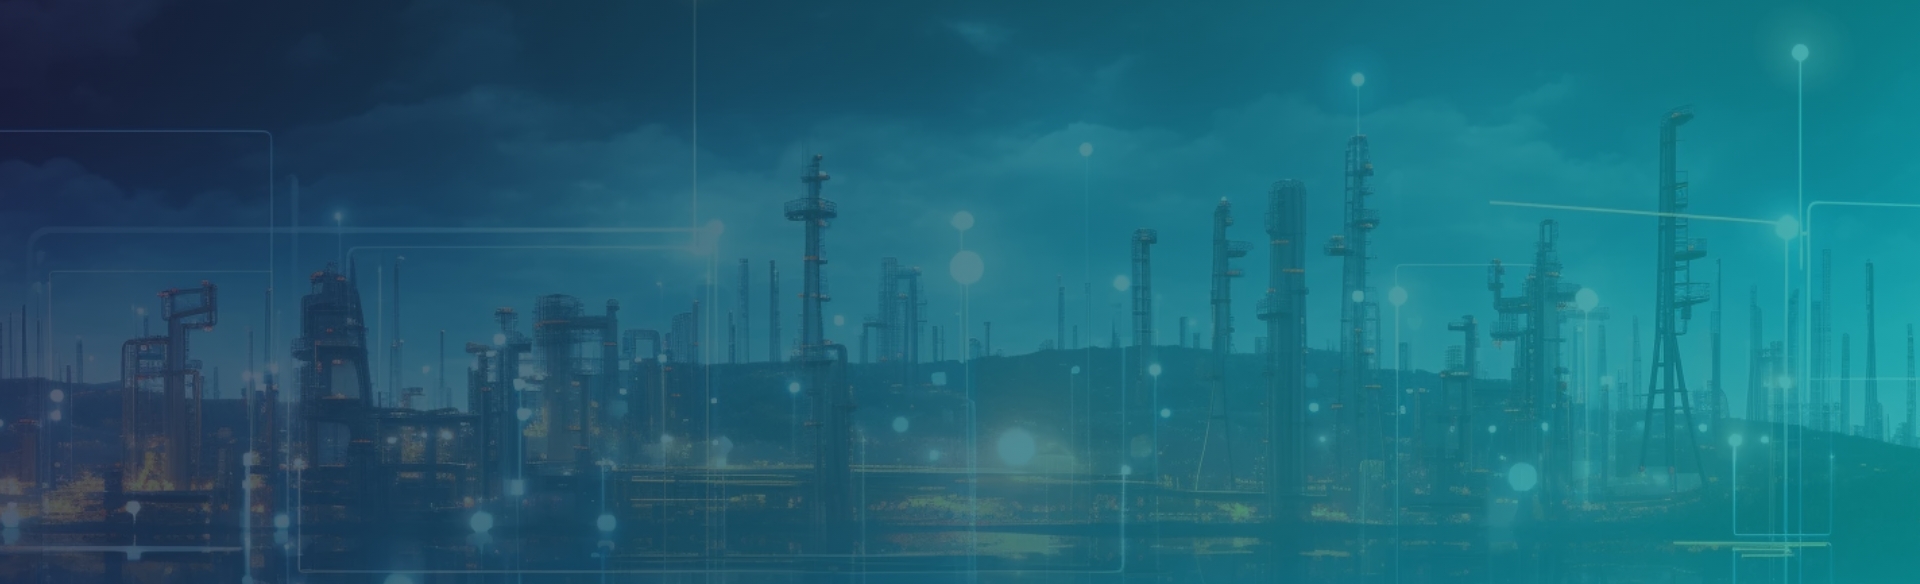 Utilities theme with industrial plant and infrastructure at night